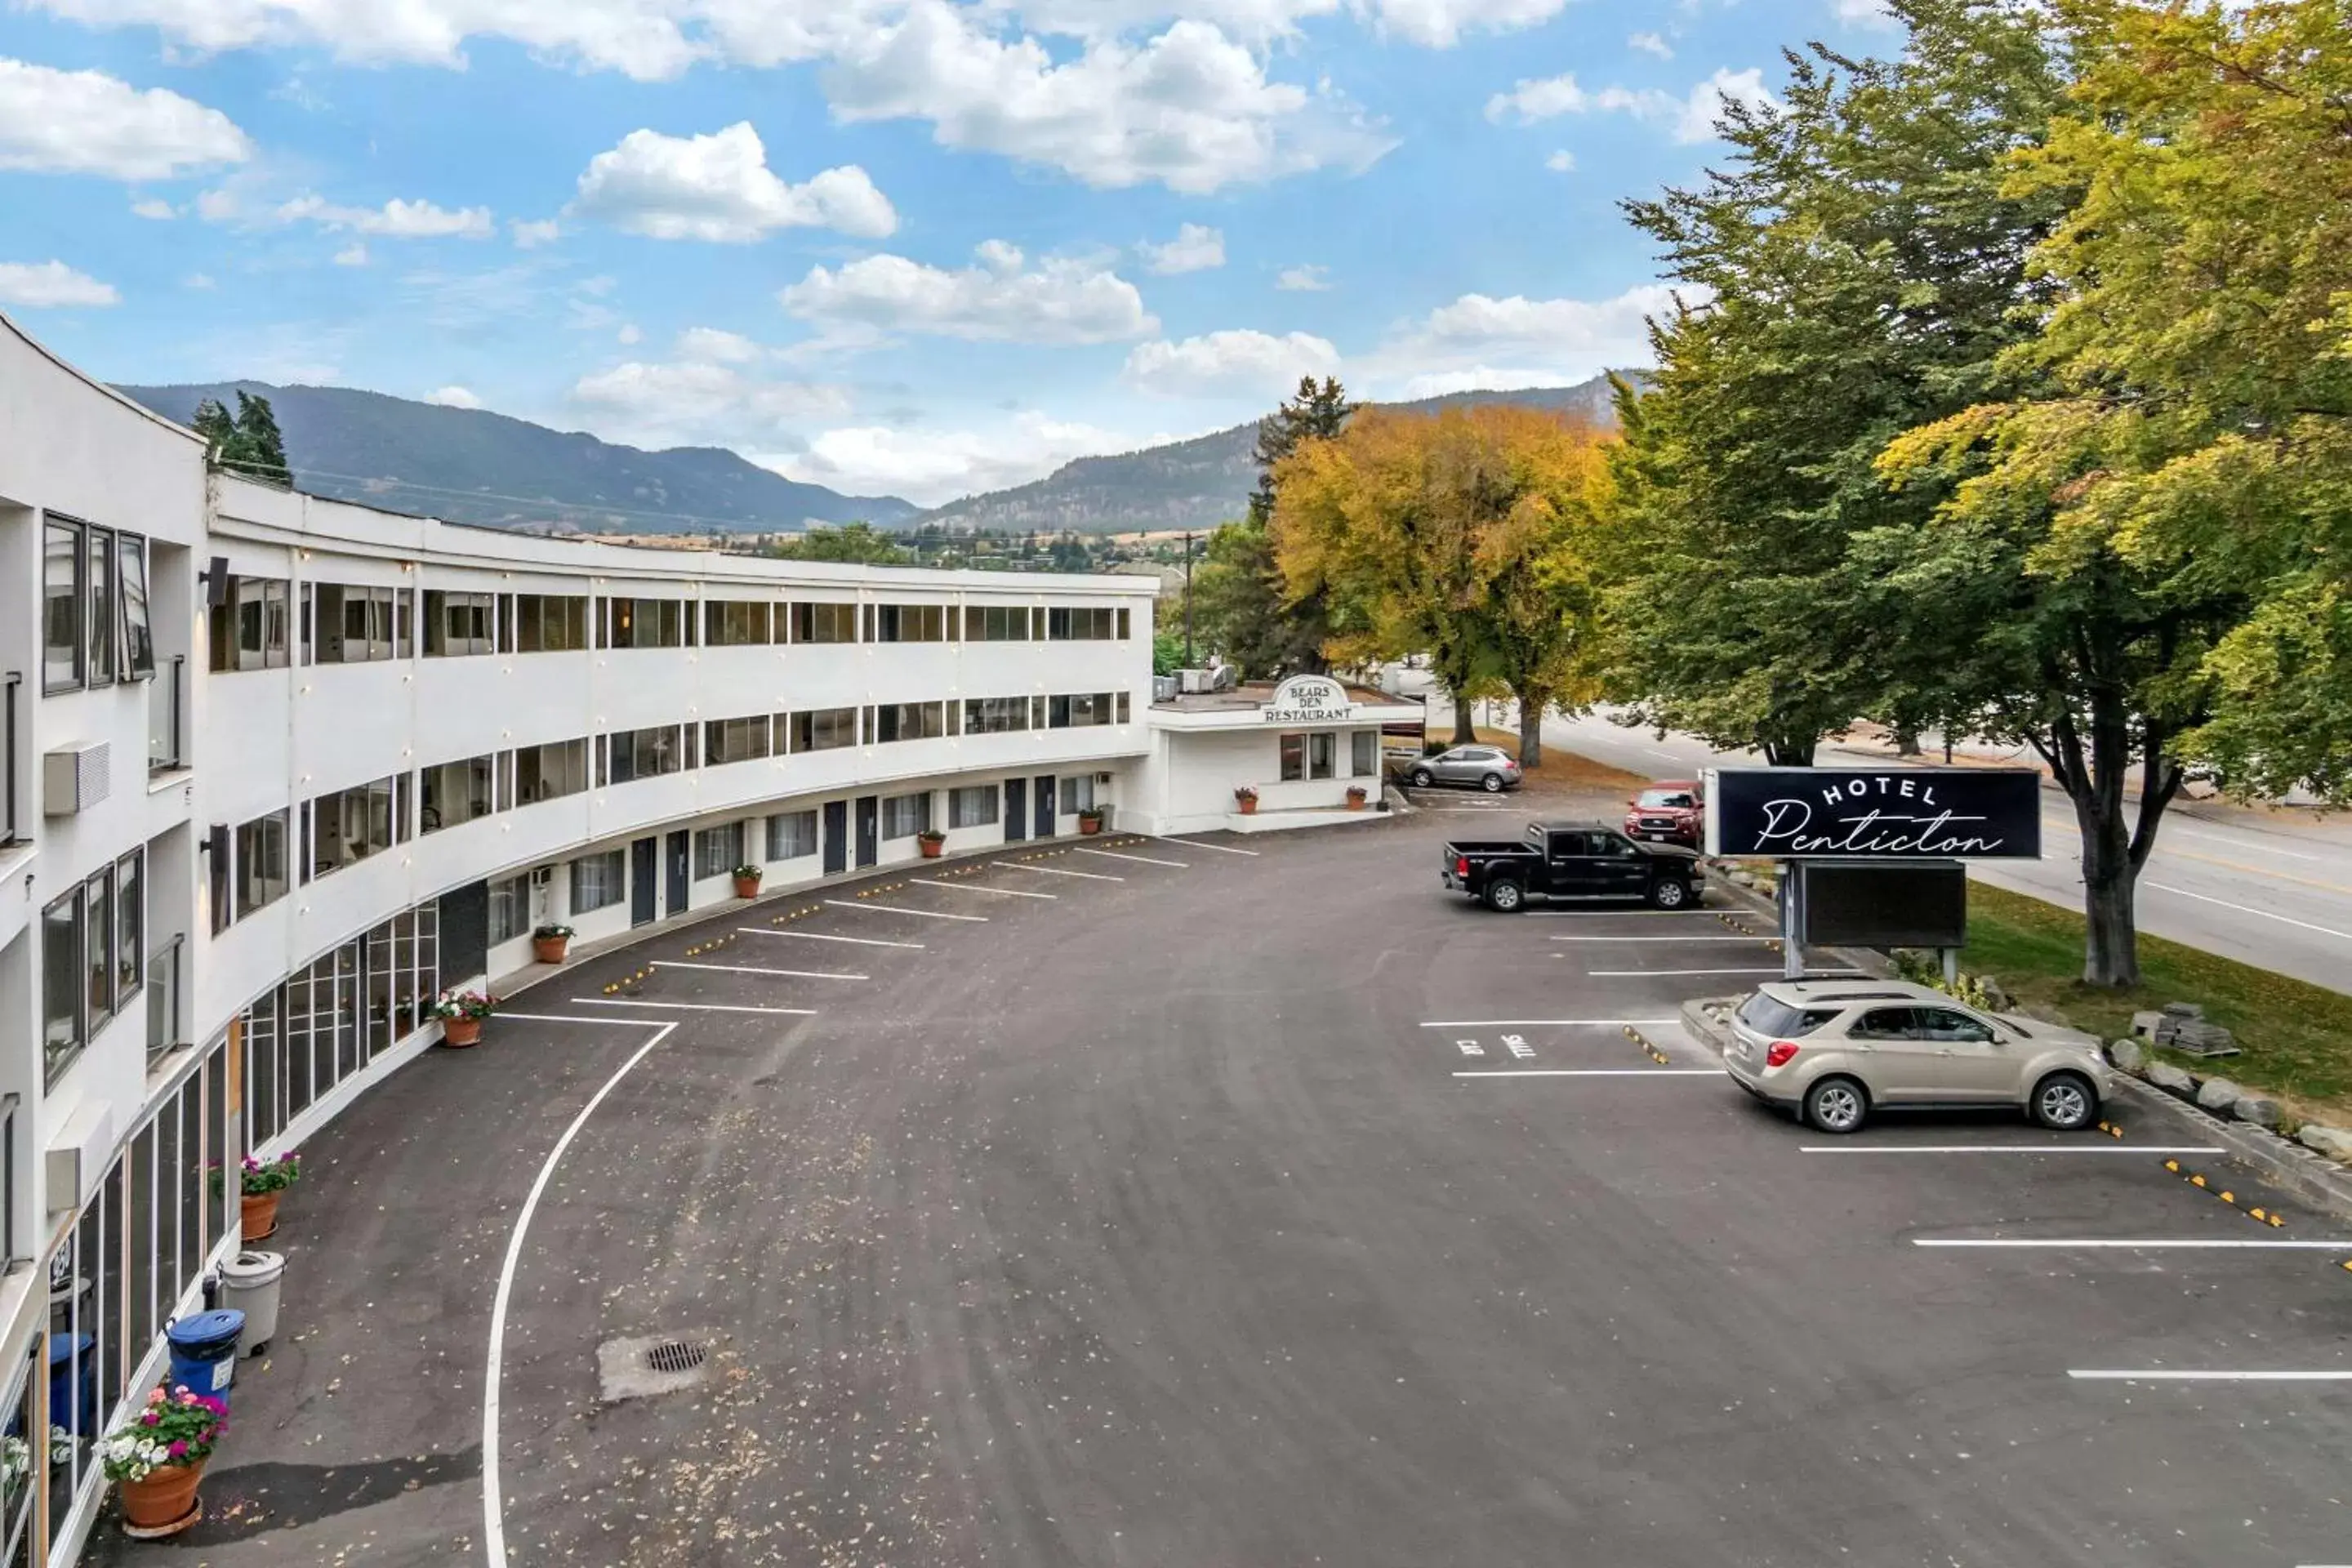 Property building in Hotel Penticton, Ascend Hotel Collection